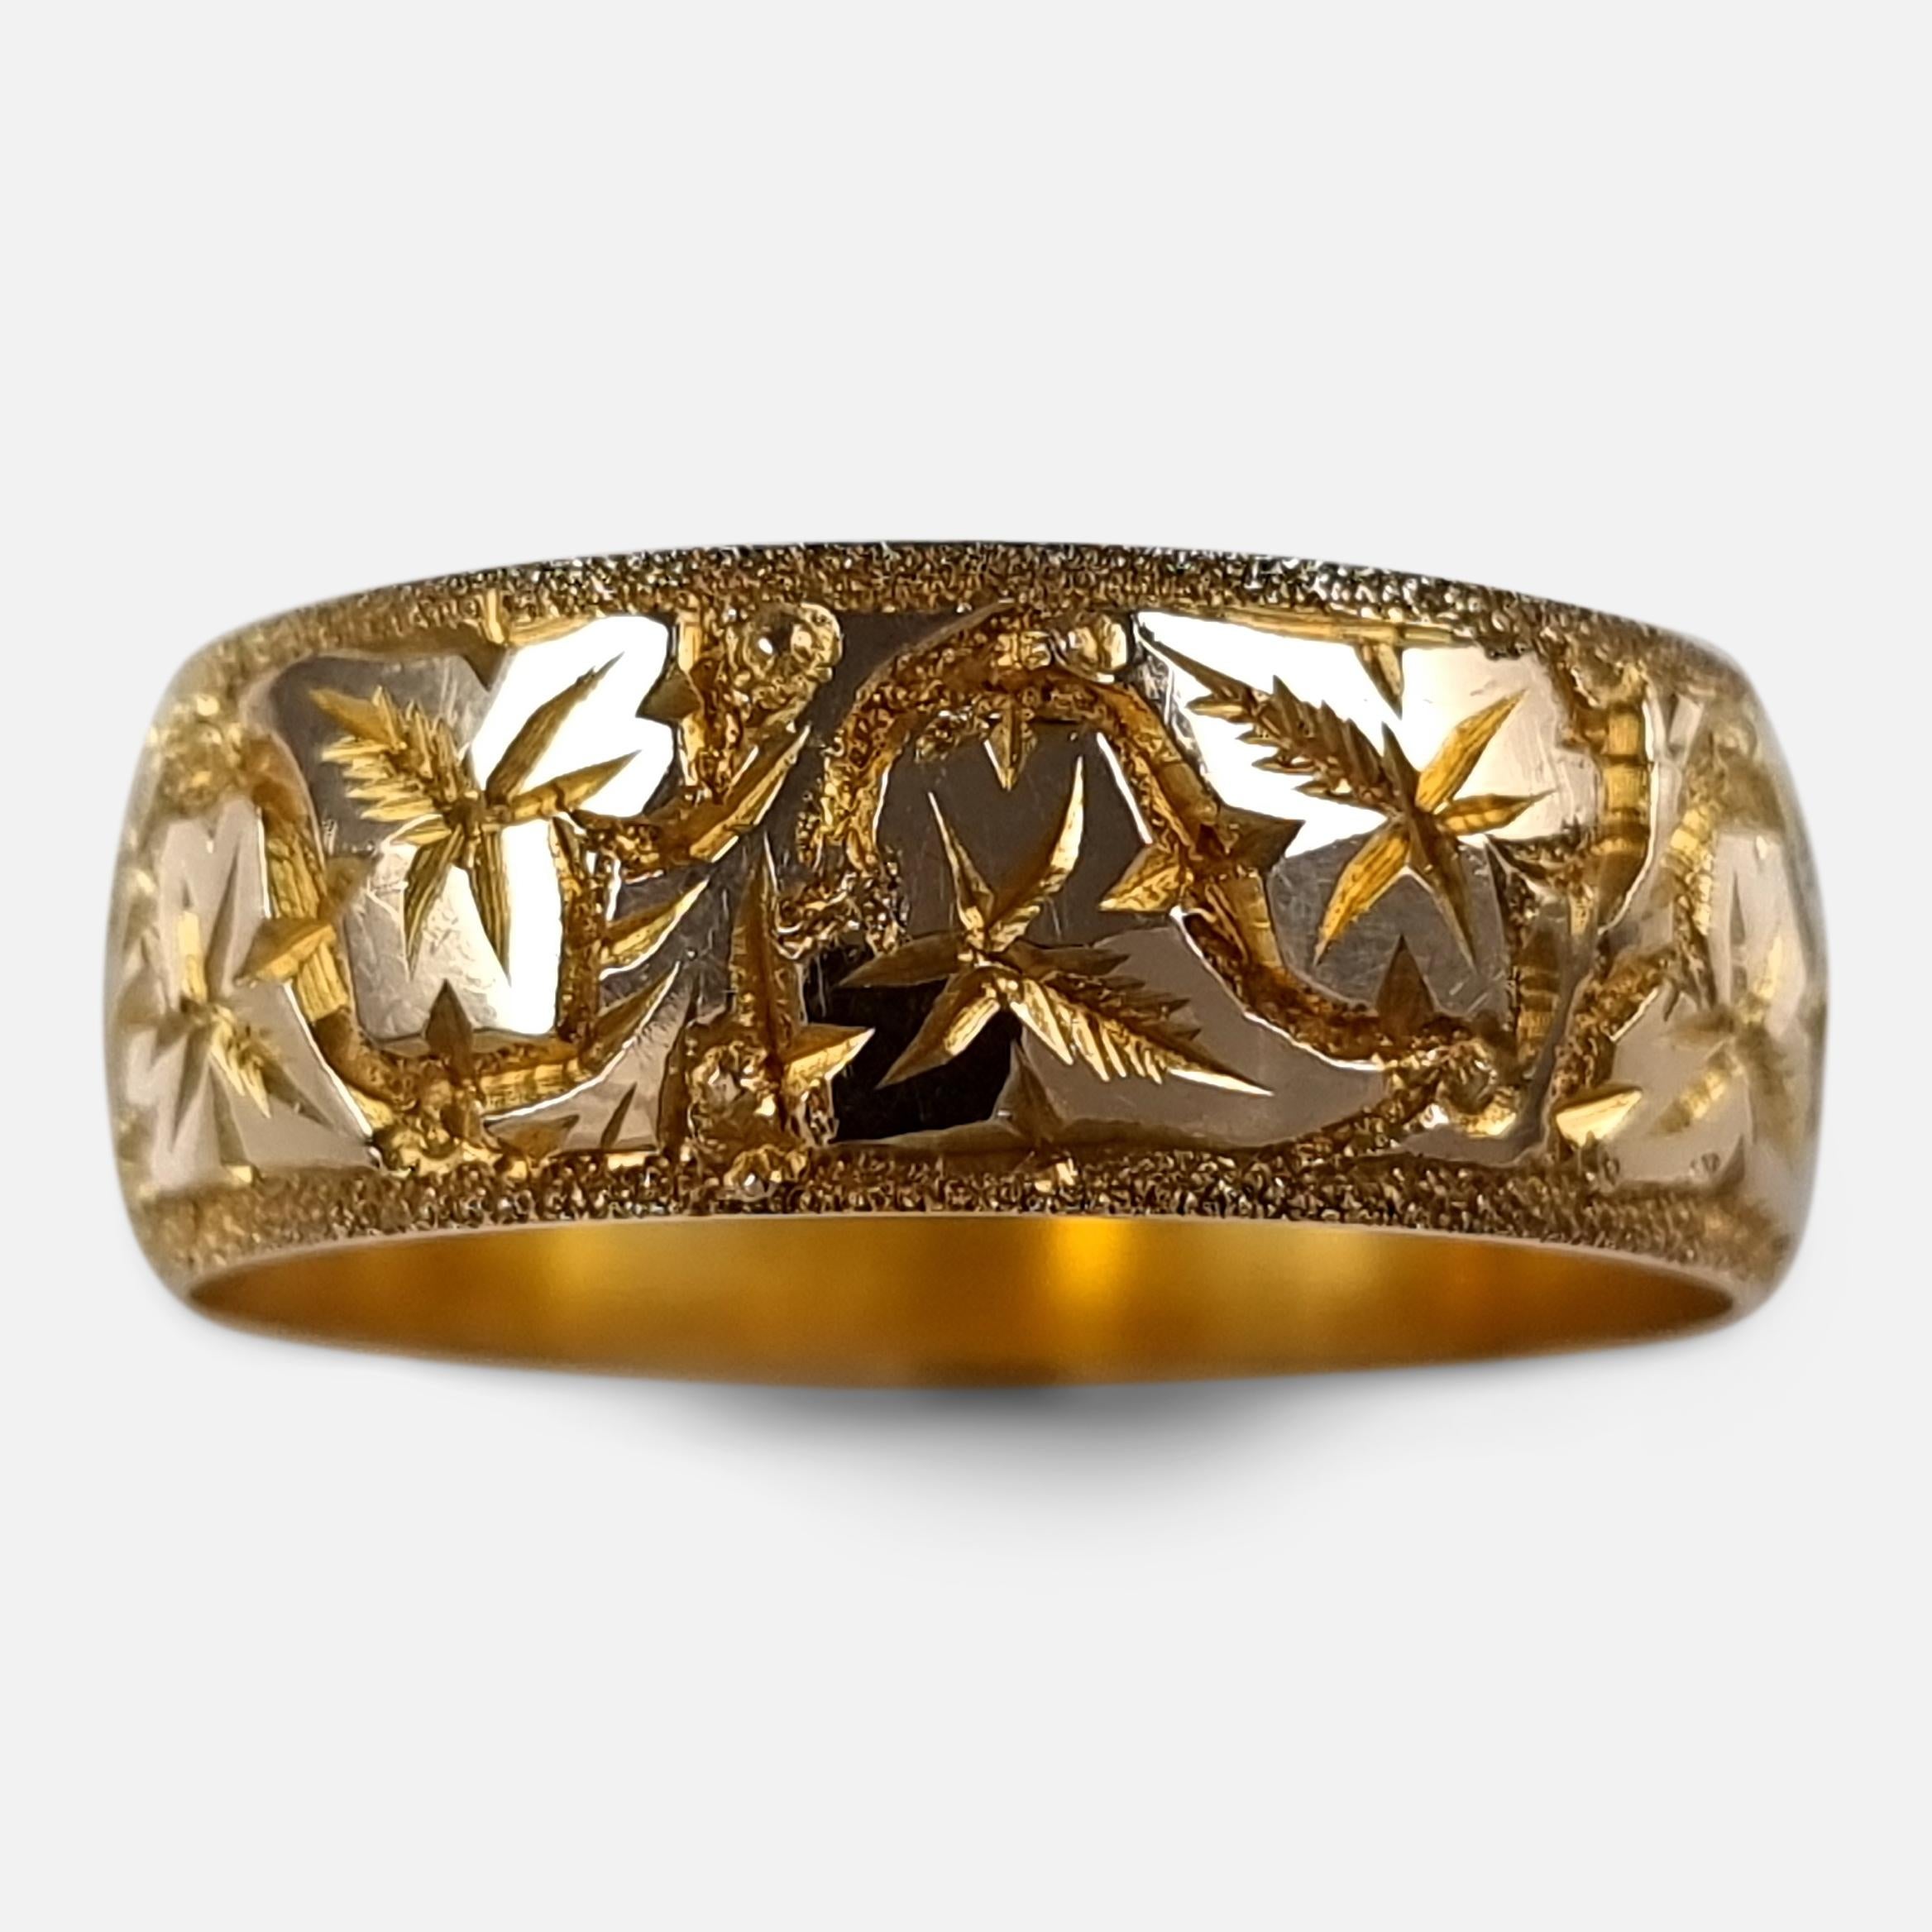 A George V 18ct yellow gold foliate engraved Keeper ring.

The ring is hallmarked with Birmingham marks, '18' for 18 carat gold, and date letter 'V' to denote 1920.

Assay: - .750 Gold (18ct).

Date: - 1920.

Period: - Early 20th